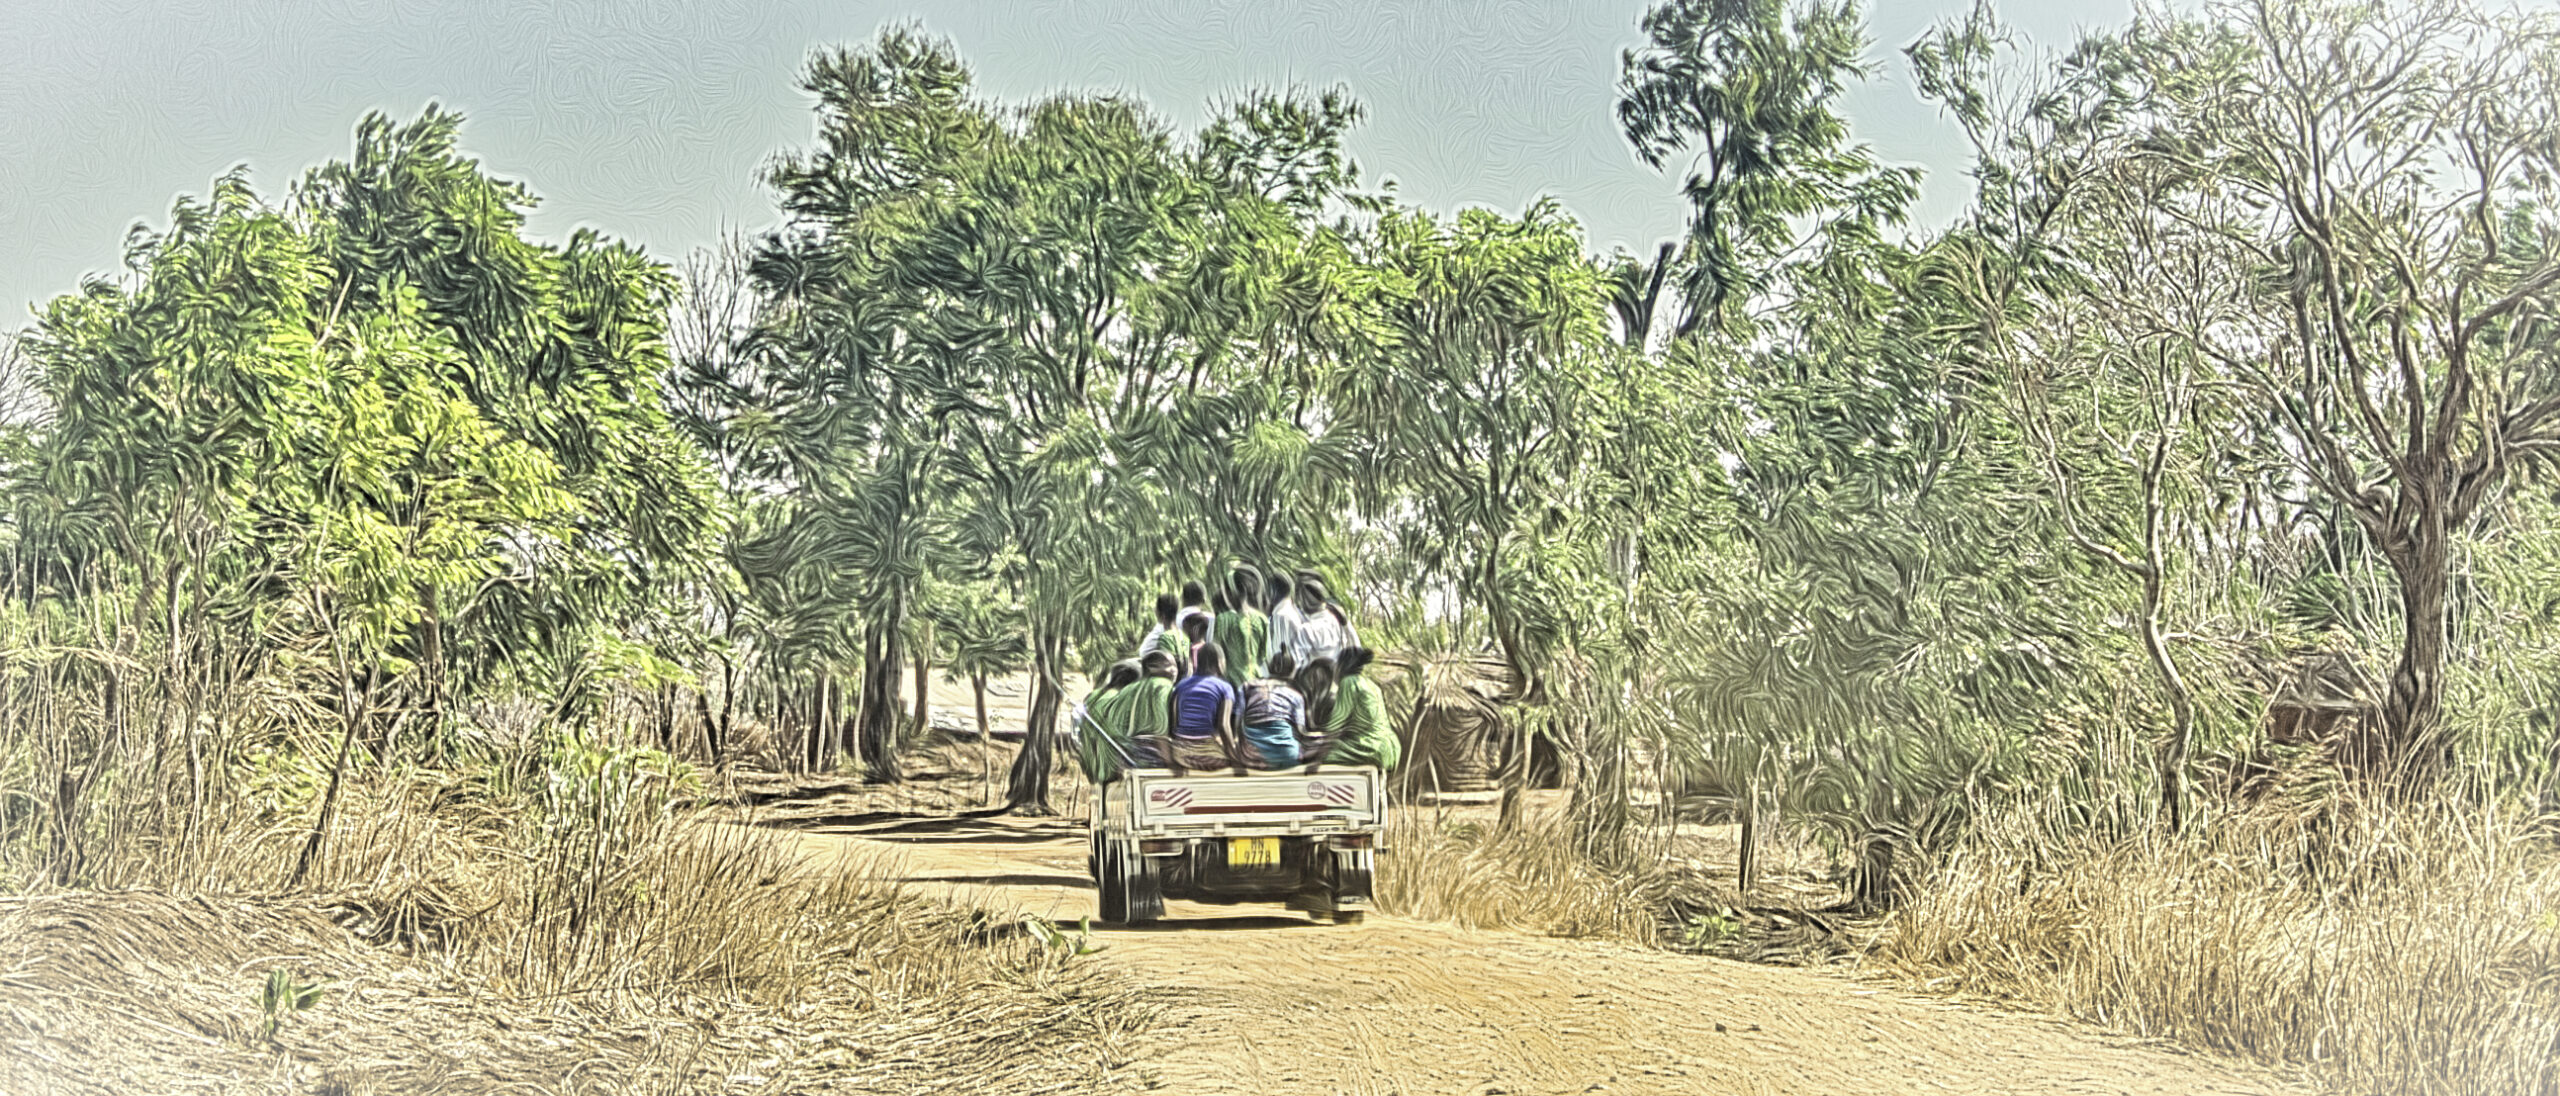 White pickup carrying worshipers home from church in Malawi